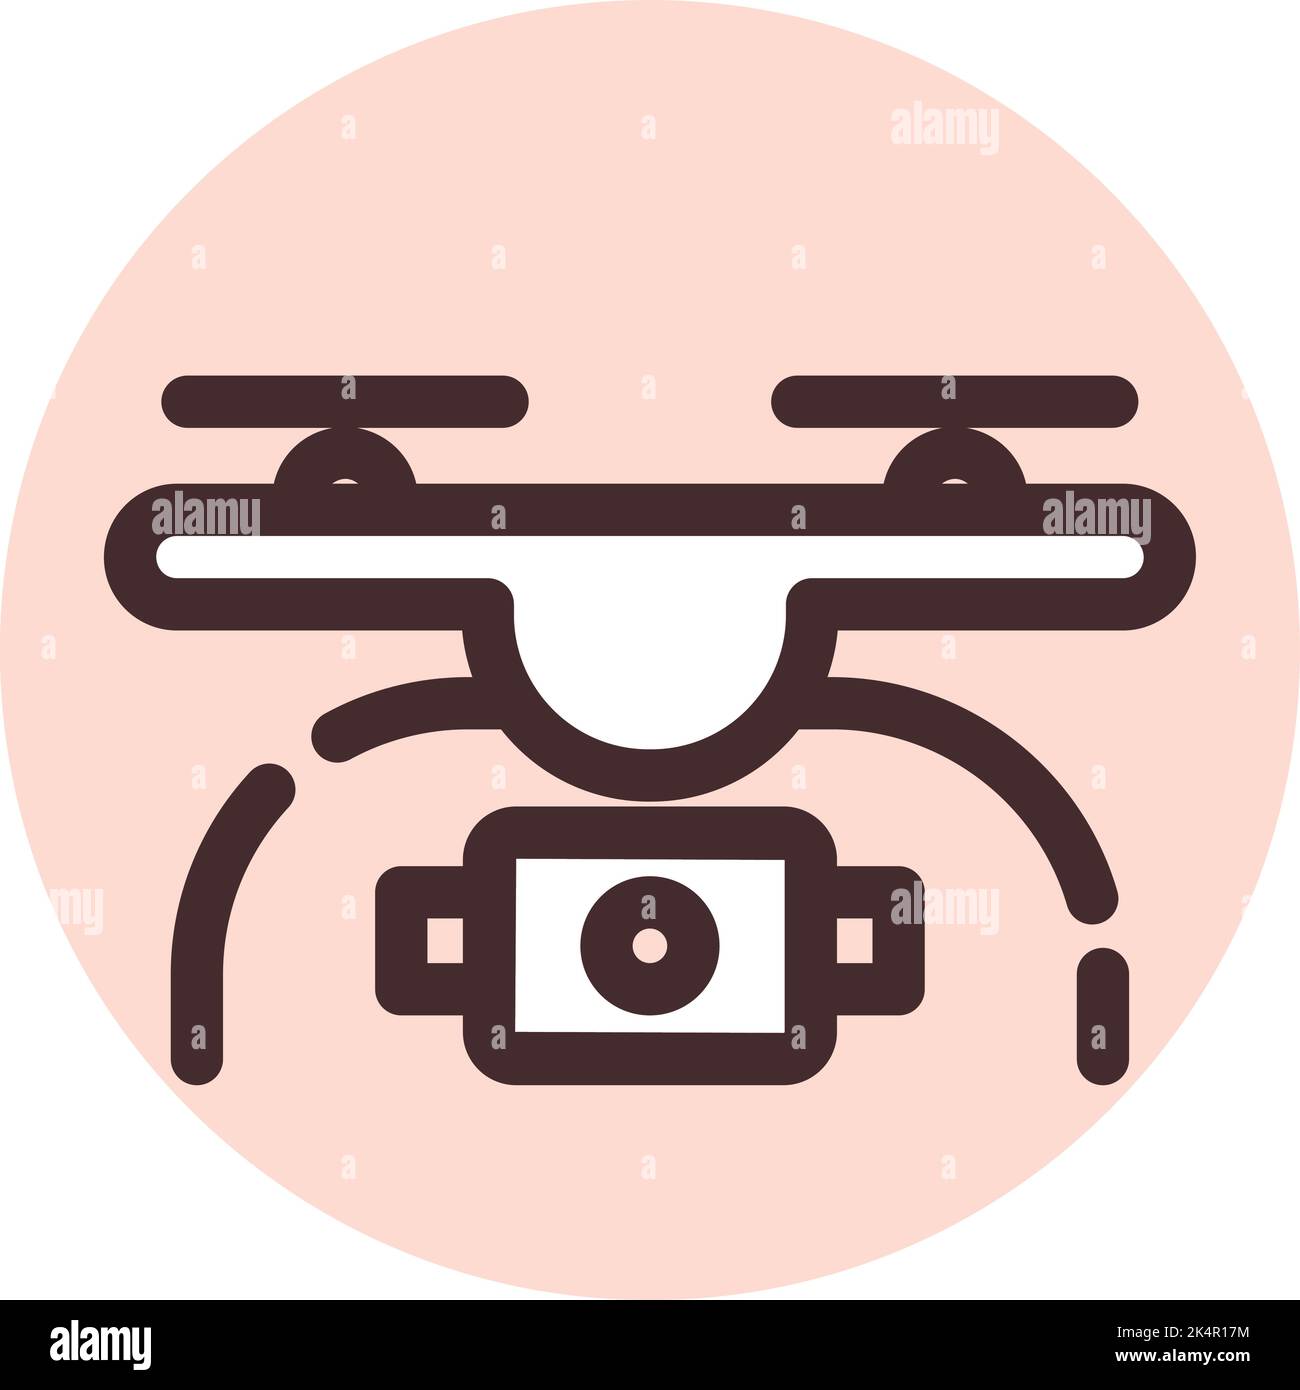 Broadcast drone, illustration, vector on a white background. Stock Vector